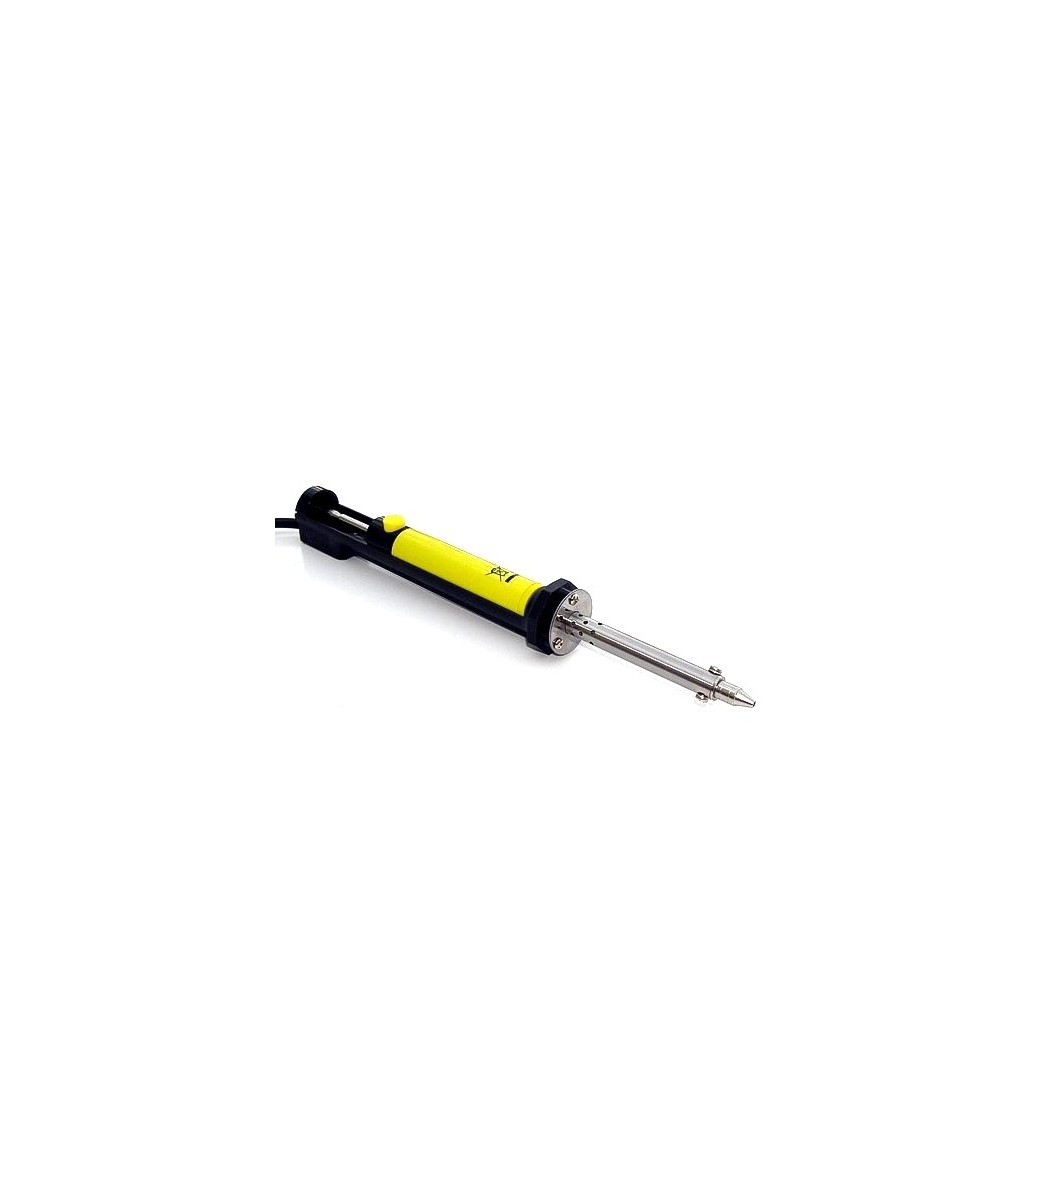 Soldering iron with suction tool 40W ZD211